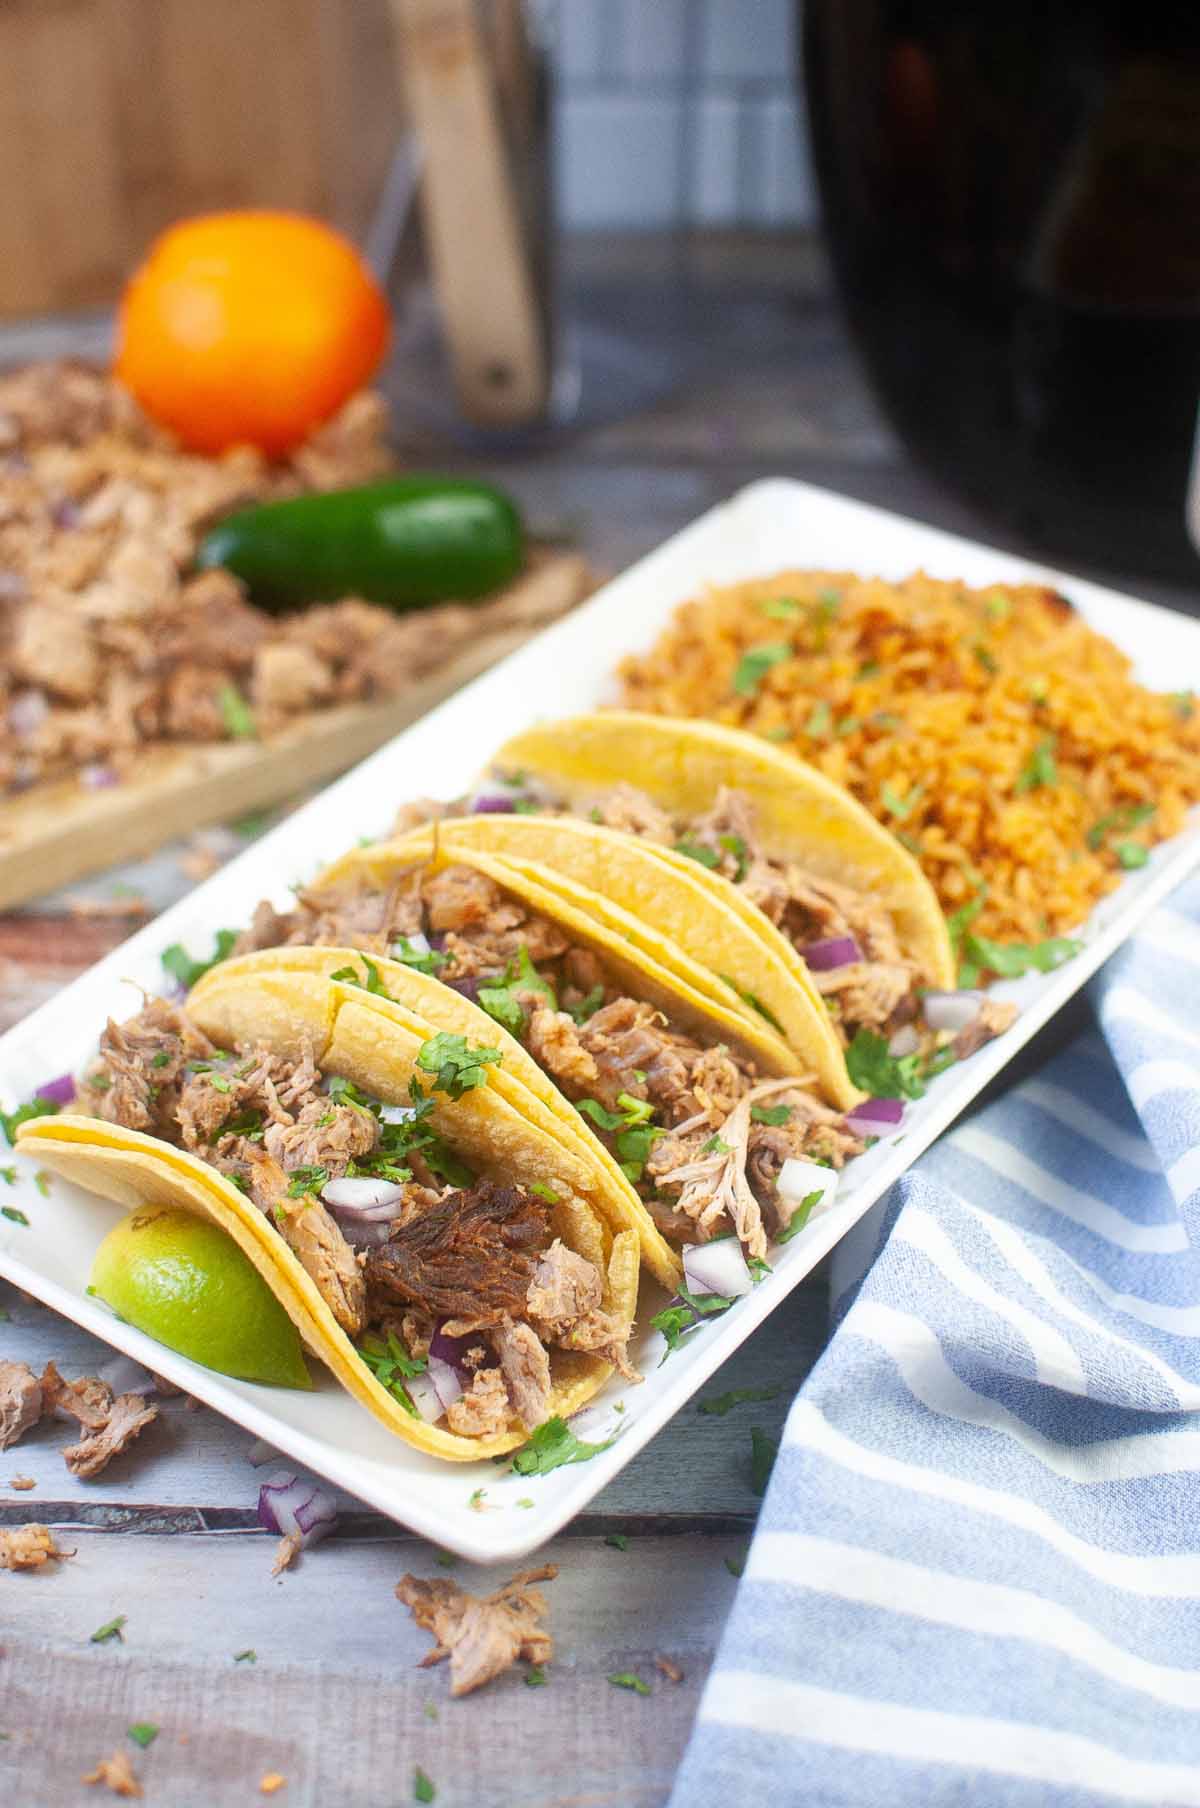 carnitas tacos on a plate with rice and a lime wedge.